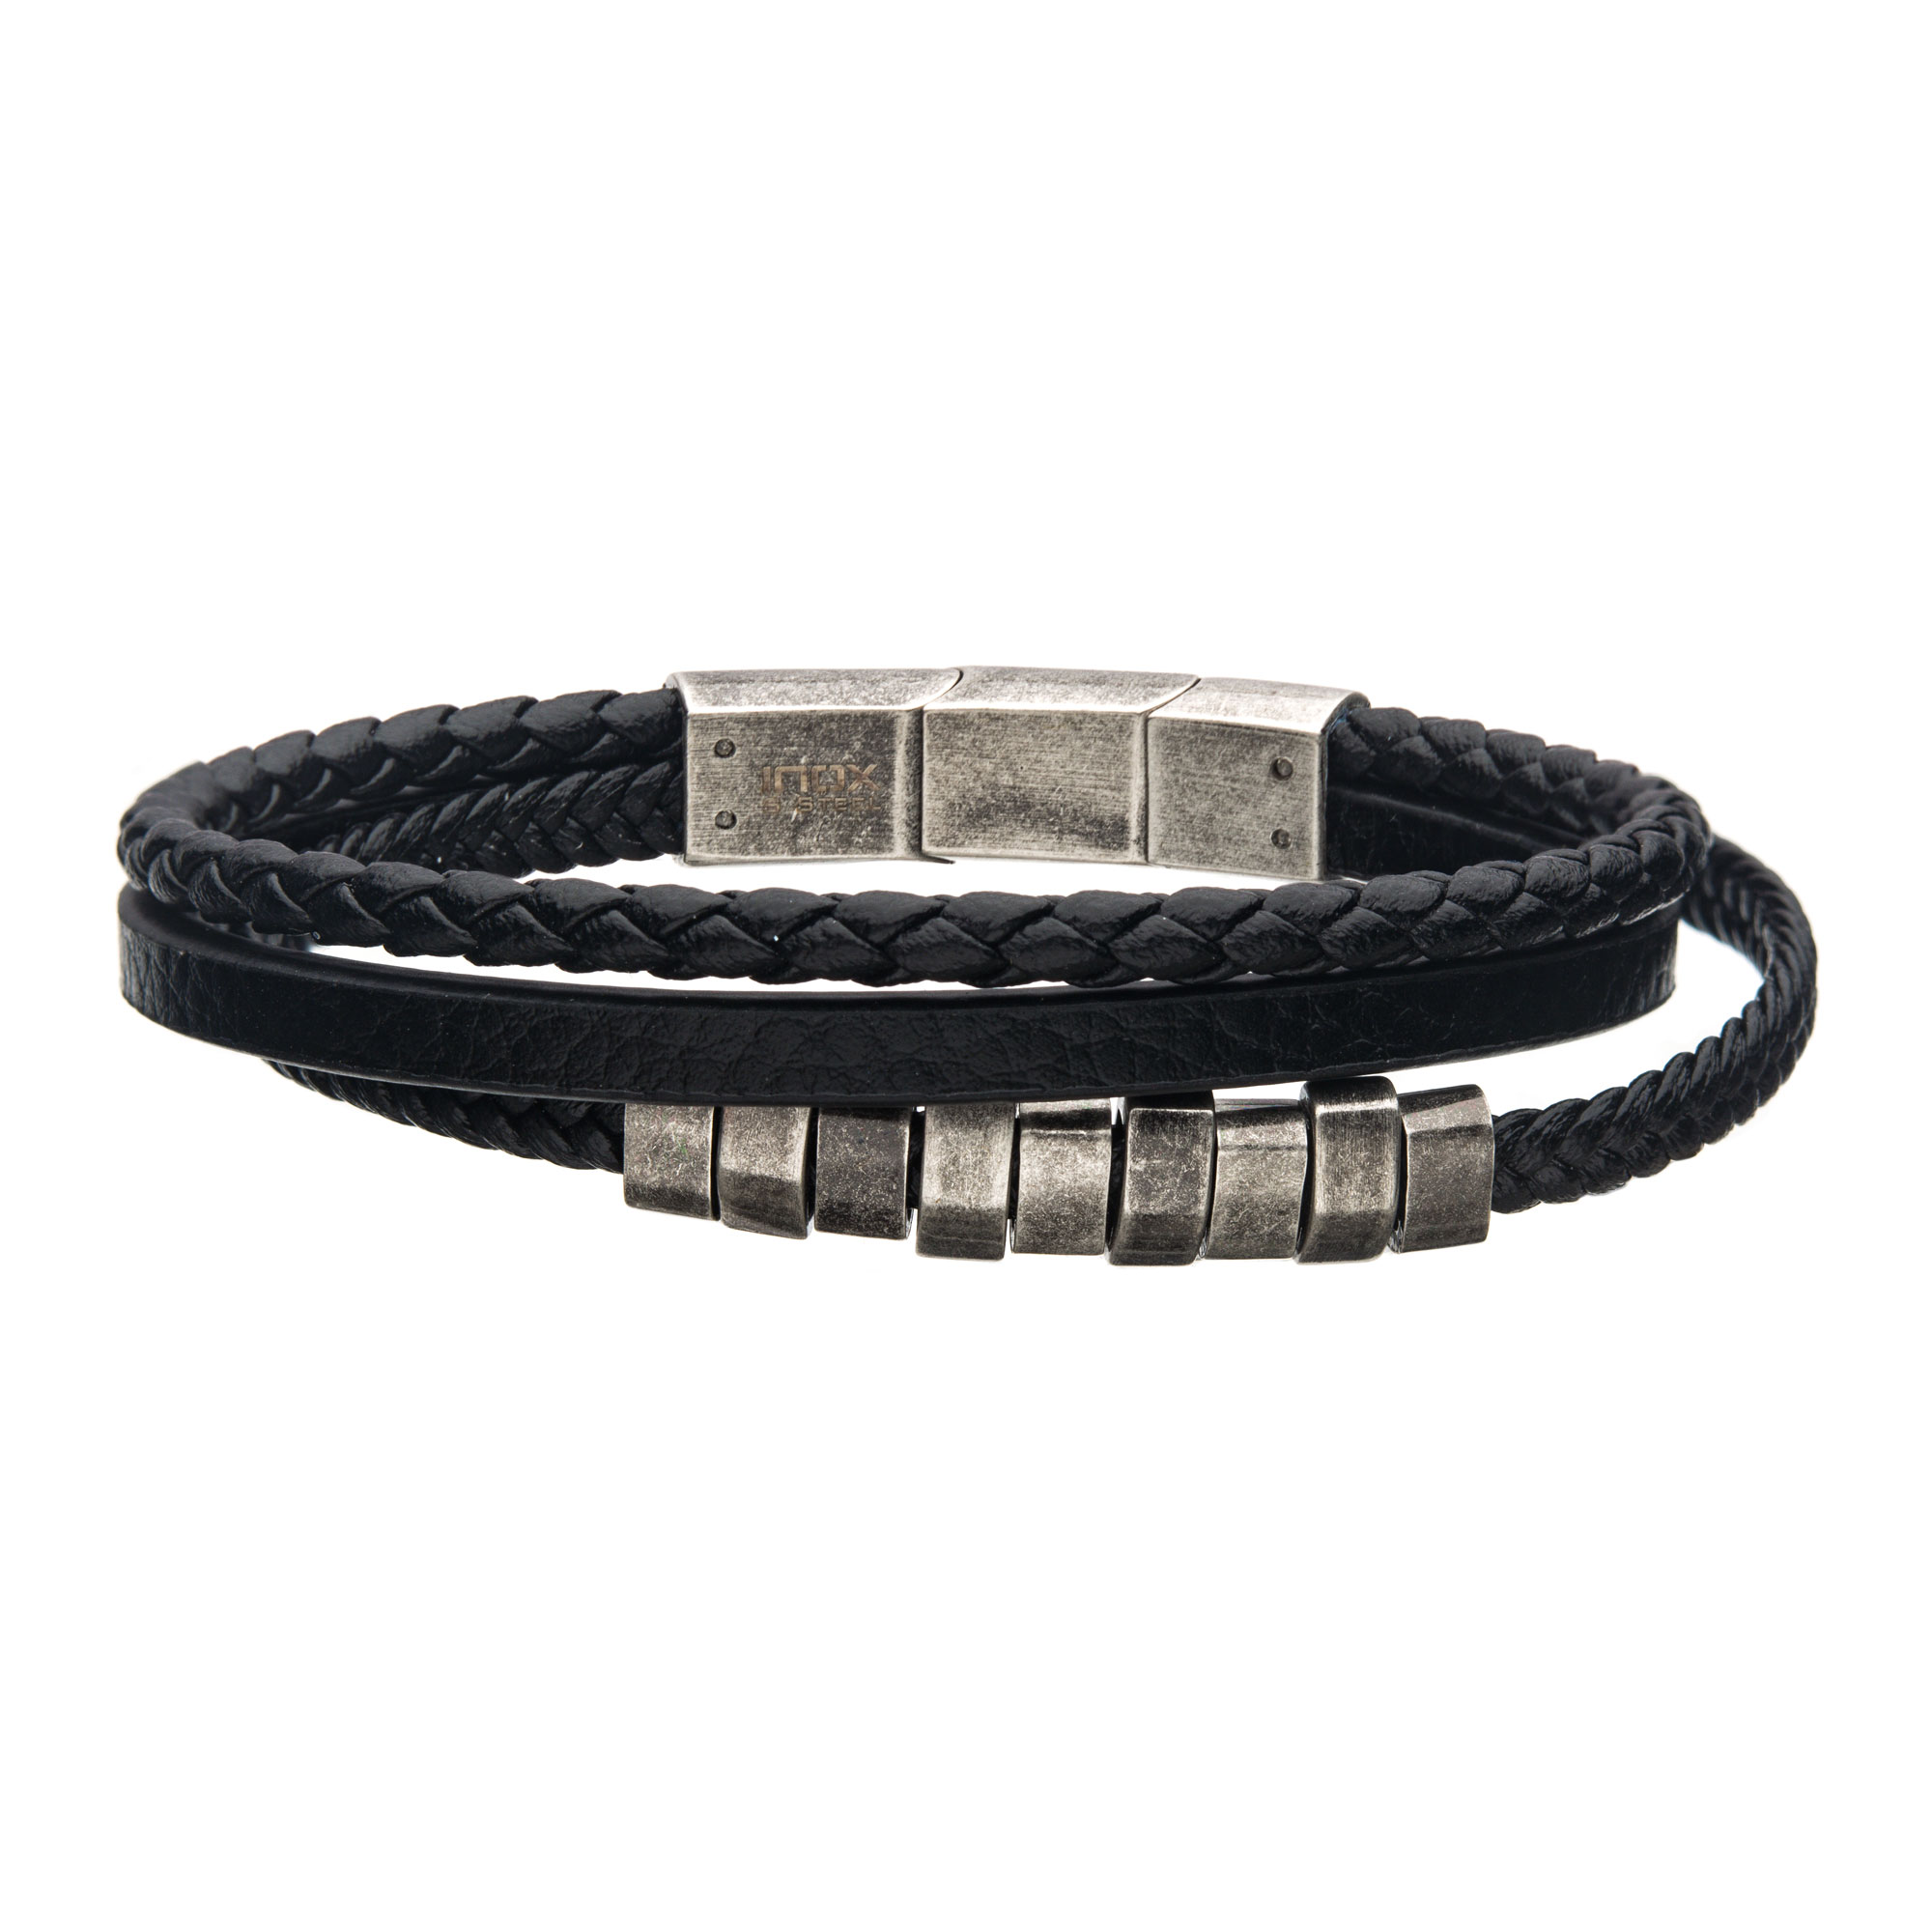 Black Braided Multi Leather with Antiqued Steel Beads Bracelet Spath Jewelers Bartow, FL